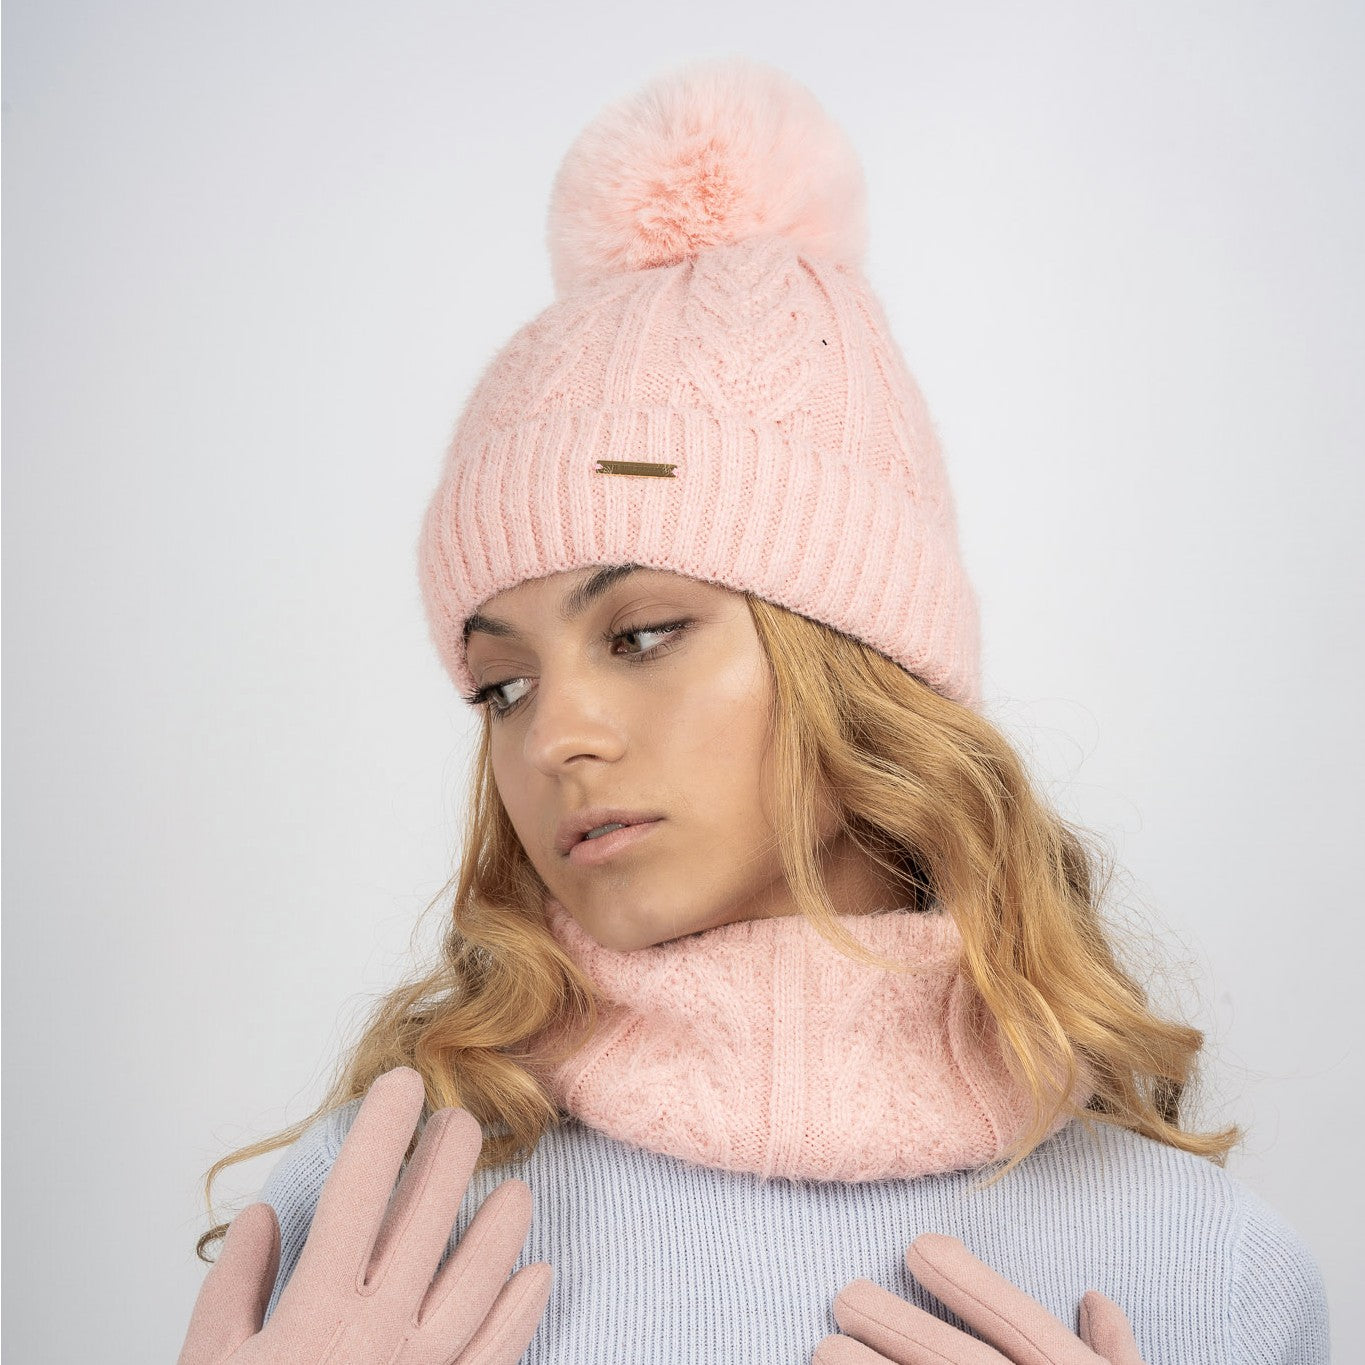 Fifi Fleece Lined Beanie & Snood Set - Baby Pink - The Pretty Hat